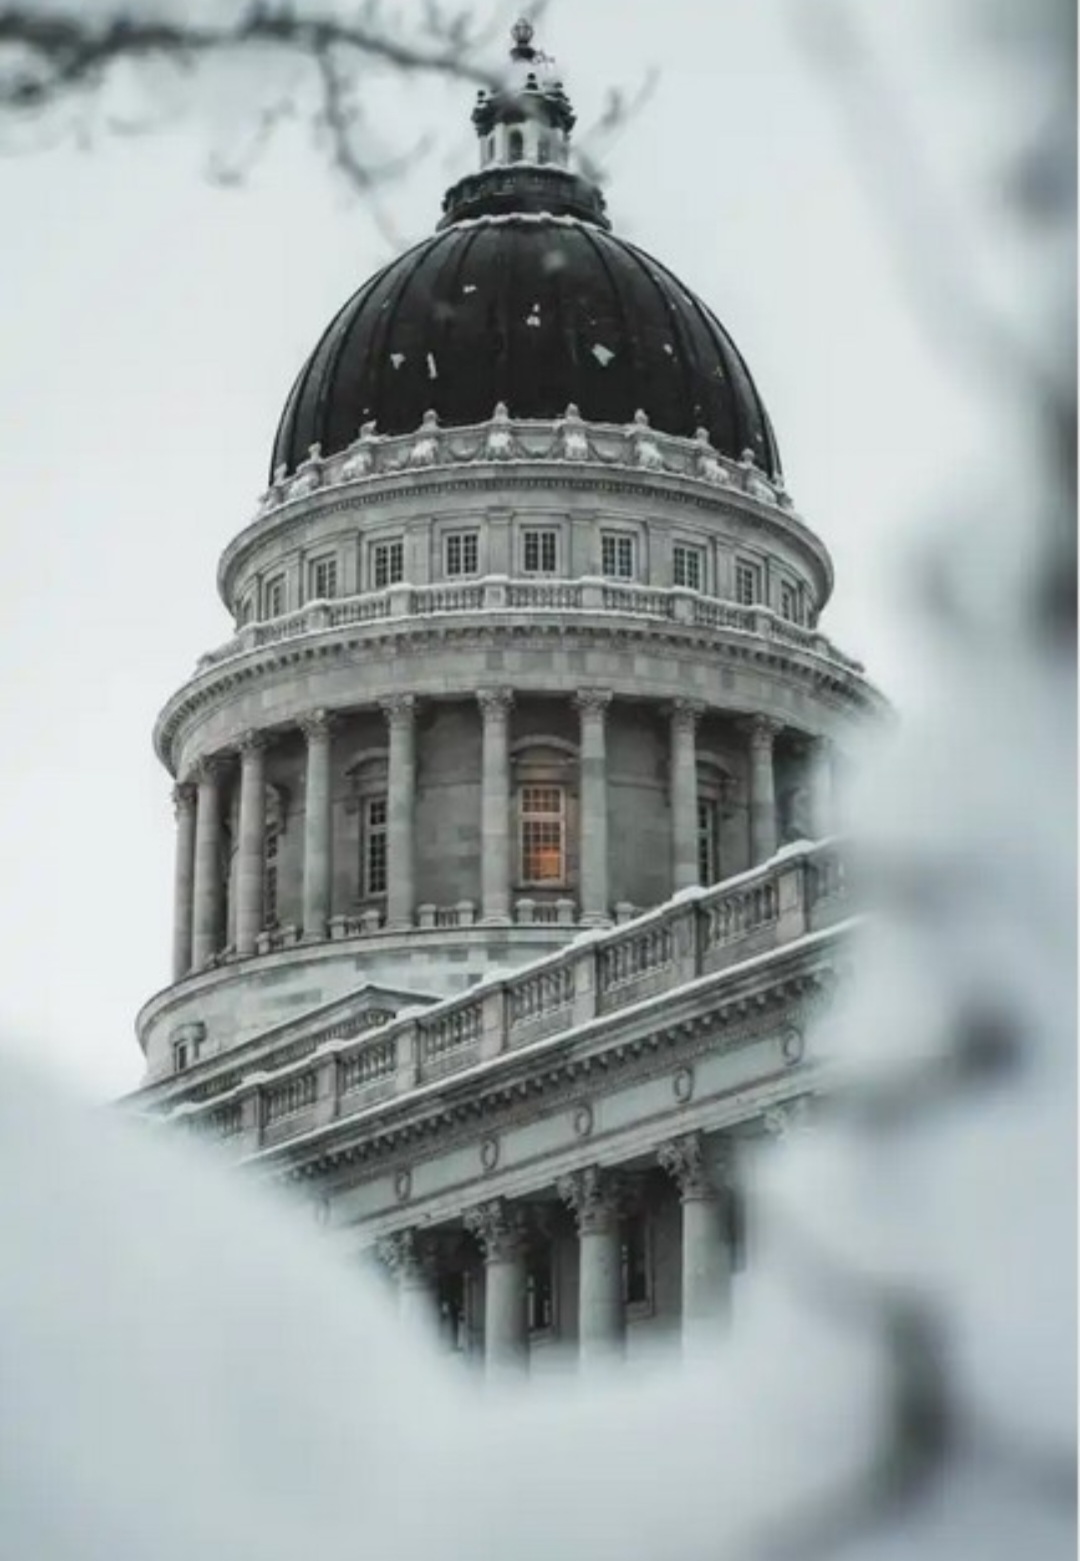 Black and White photograph of the capital dome in wintertime